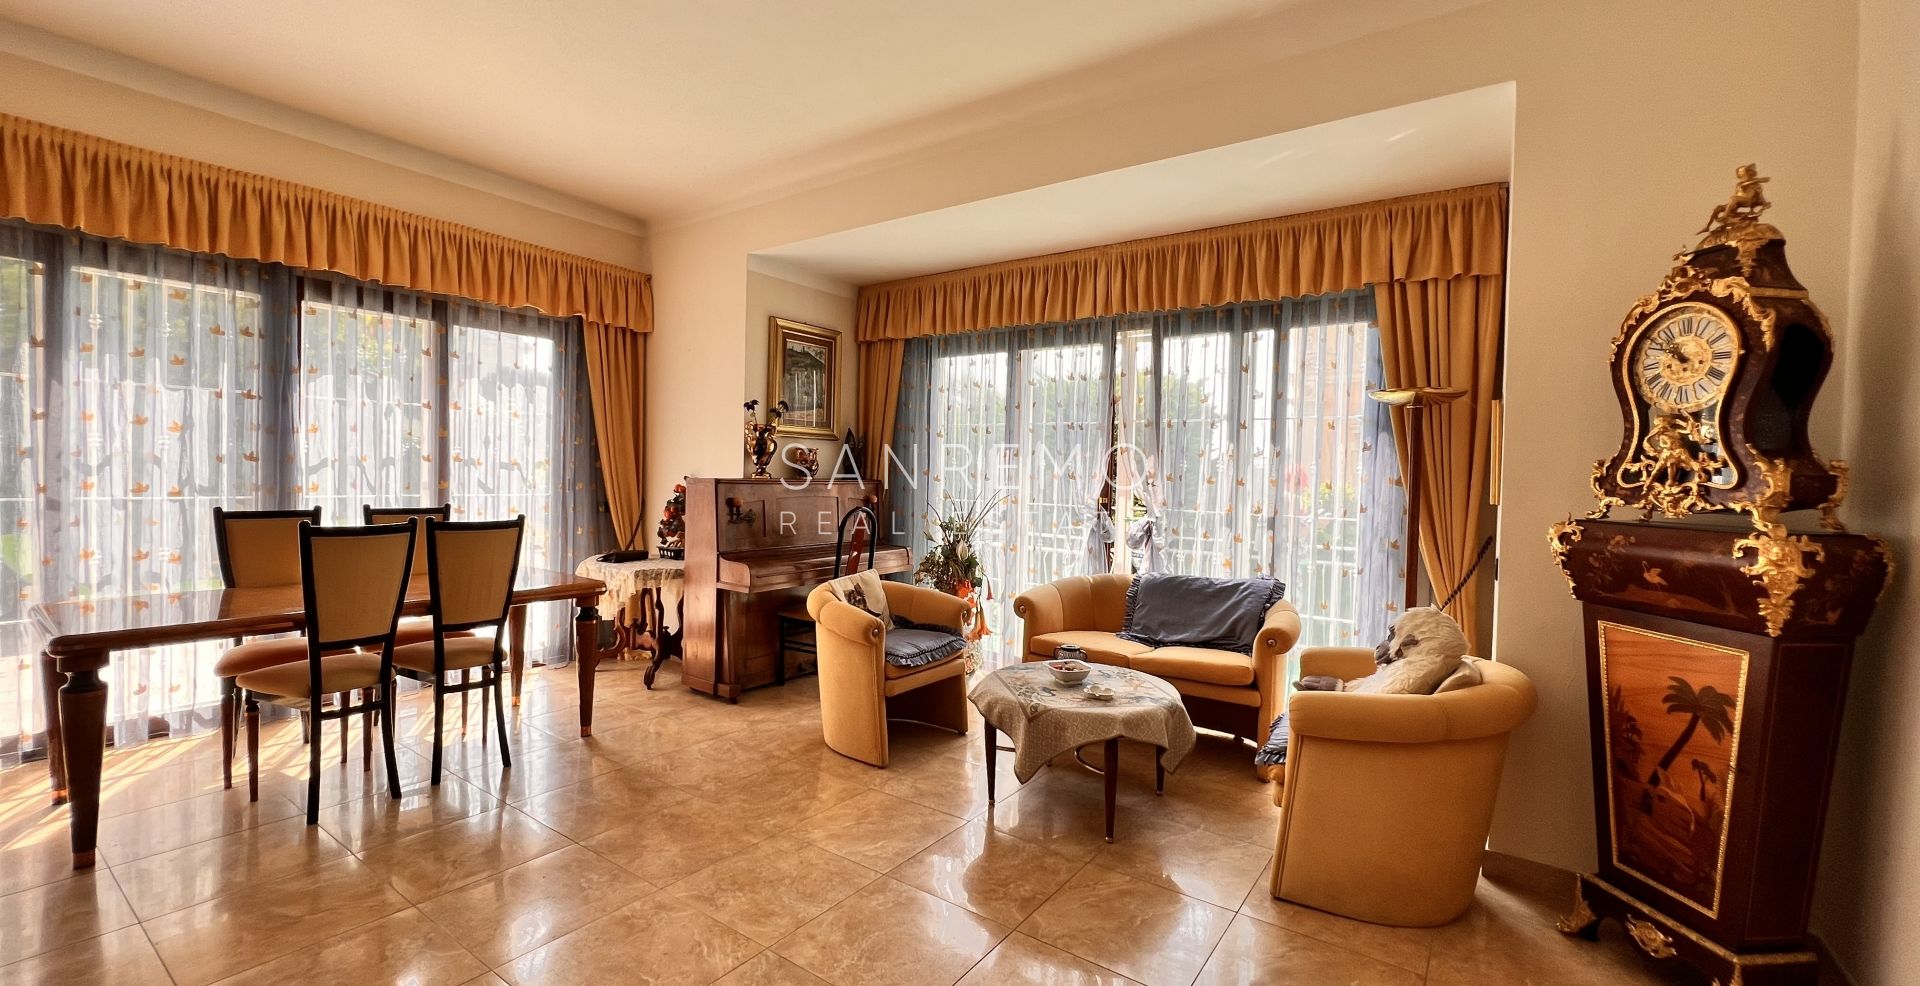 Lovely villa surrounded by greenery within walking distance of the Casino